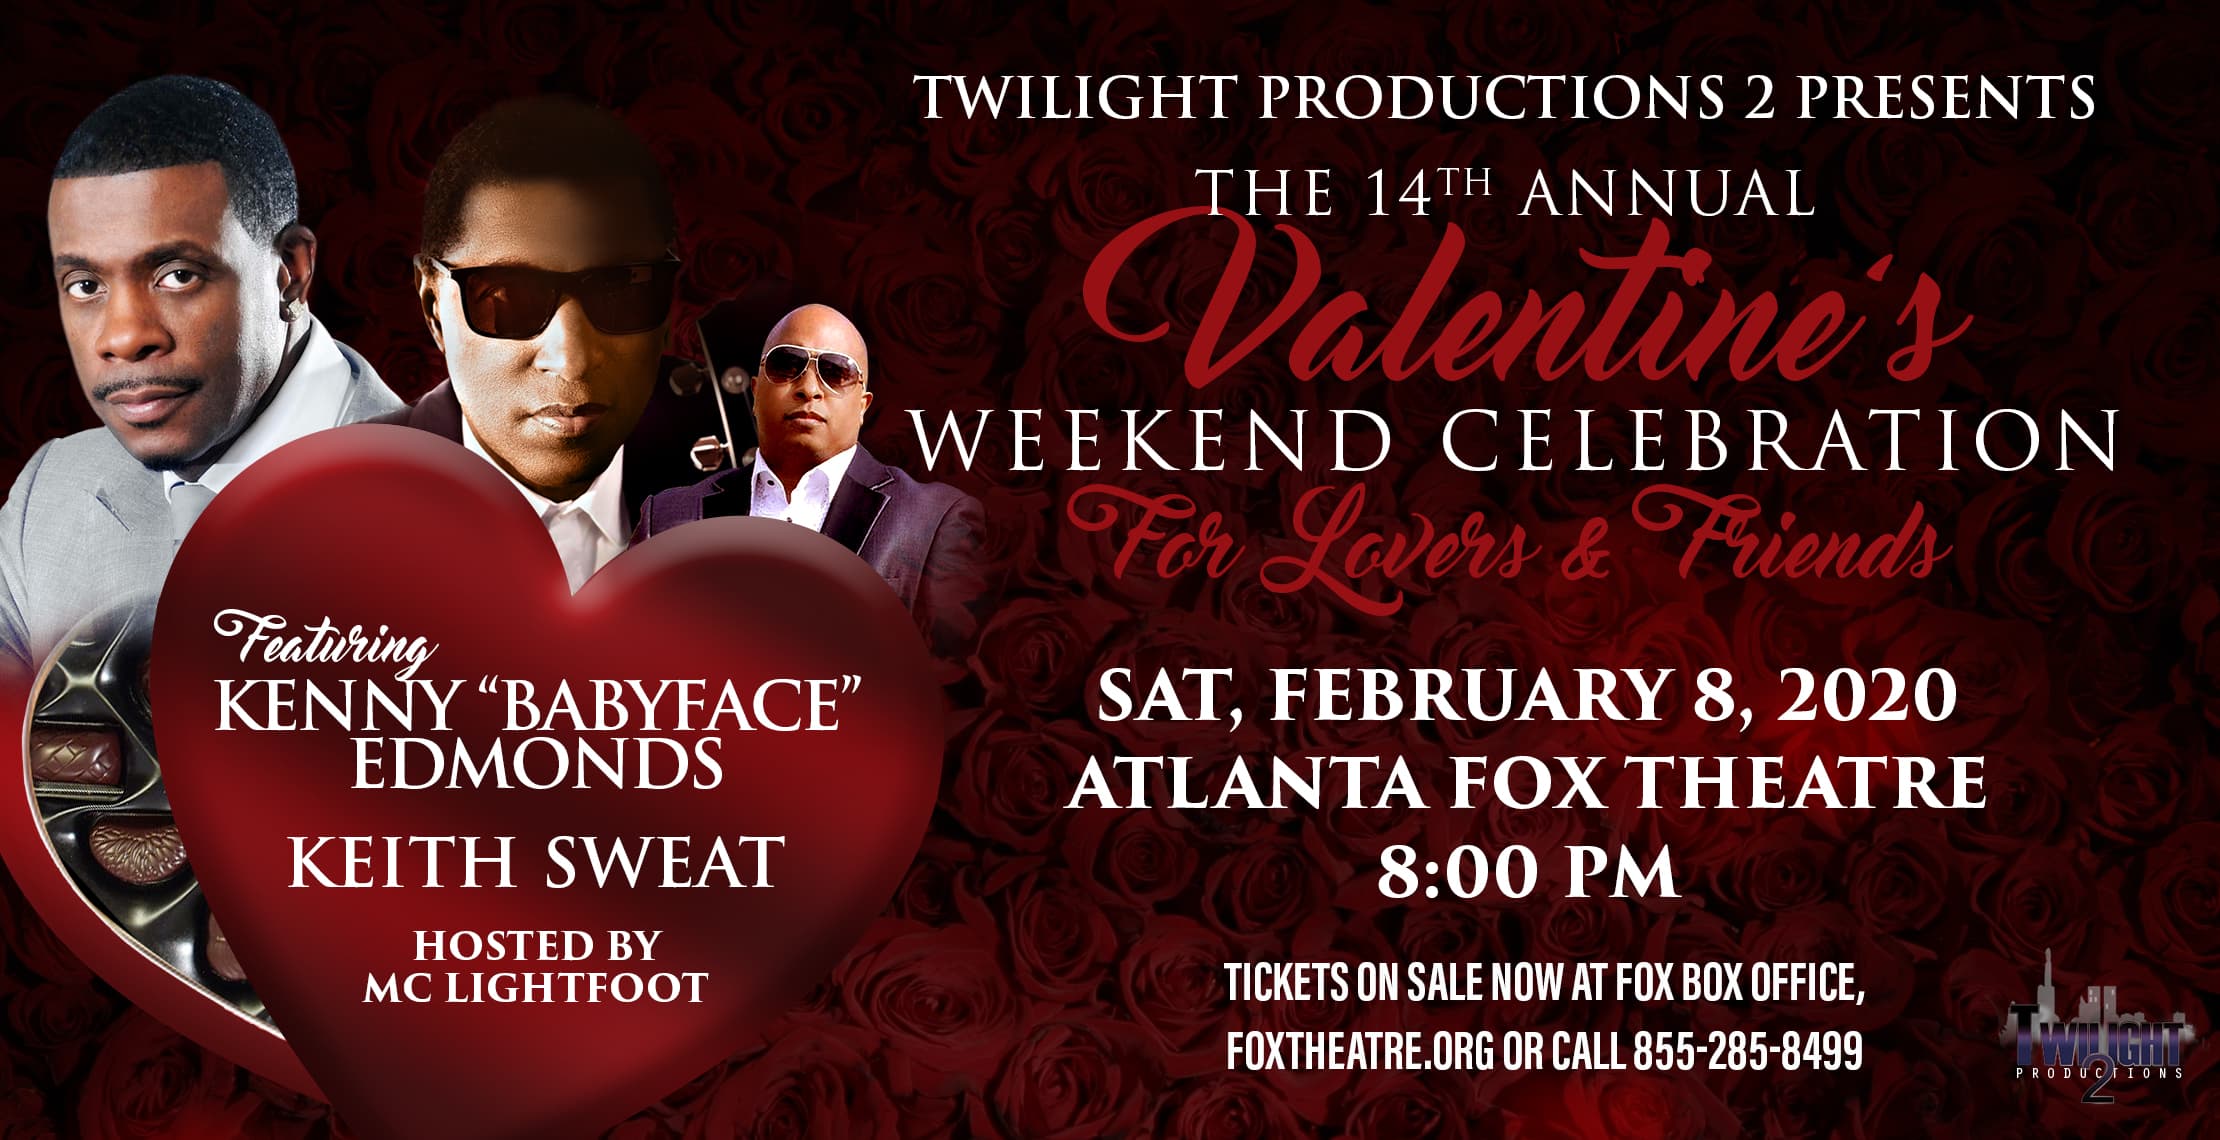 Kenny "Babyface" Edmonds and Keith Sweat's 14th Annual Valentine's Weekend Celebration for "Lovers and Friends"